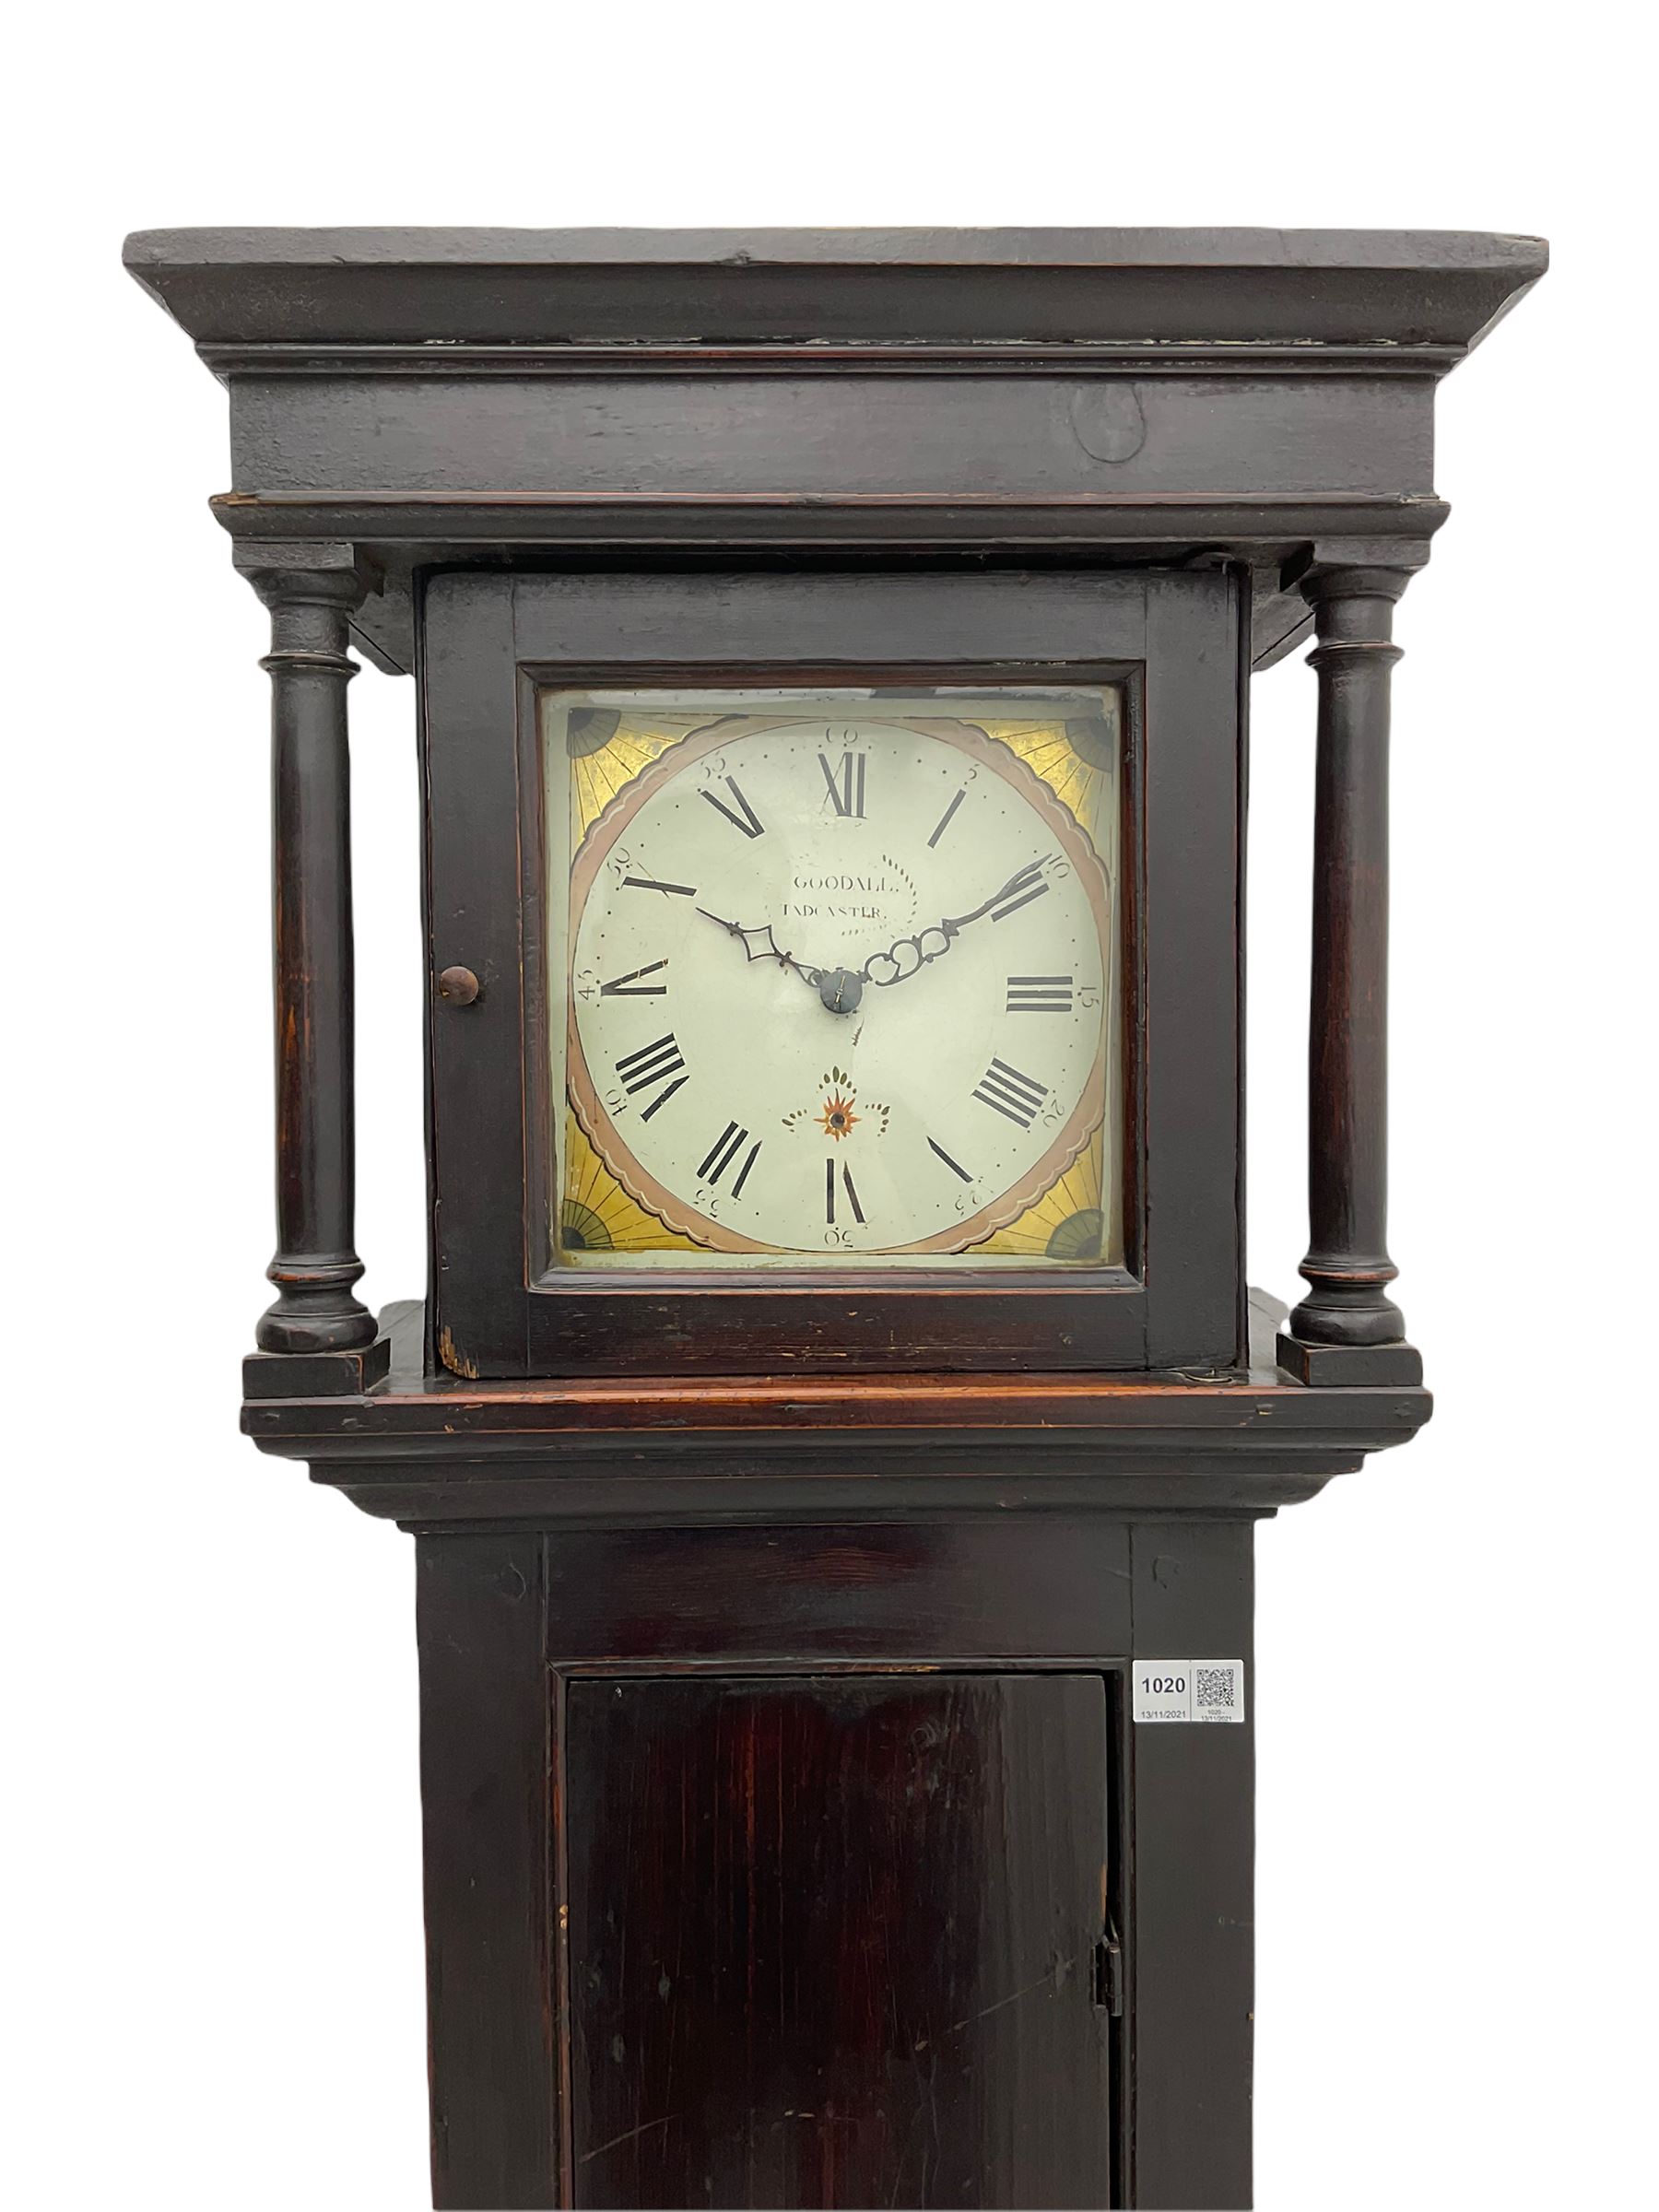 A provincial 30-hour chain driven longcase clock in an oak finished case with a flat top and wide co - Image 2 of 7